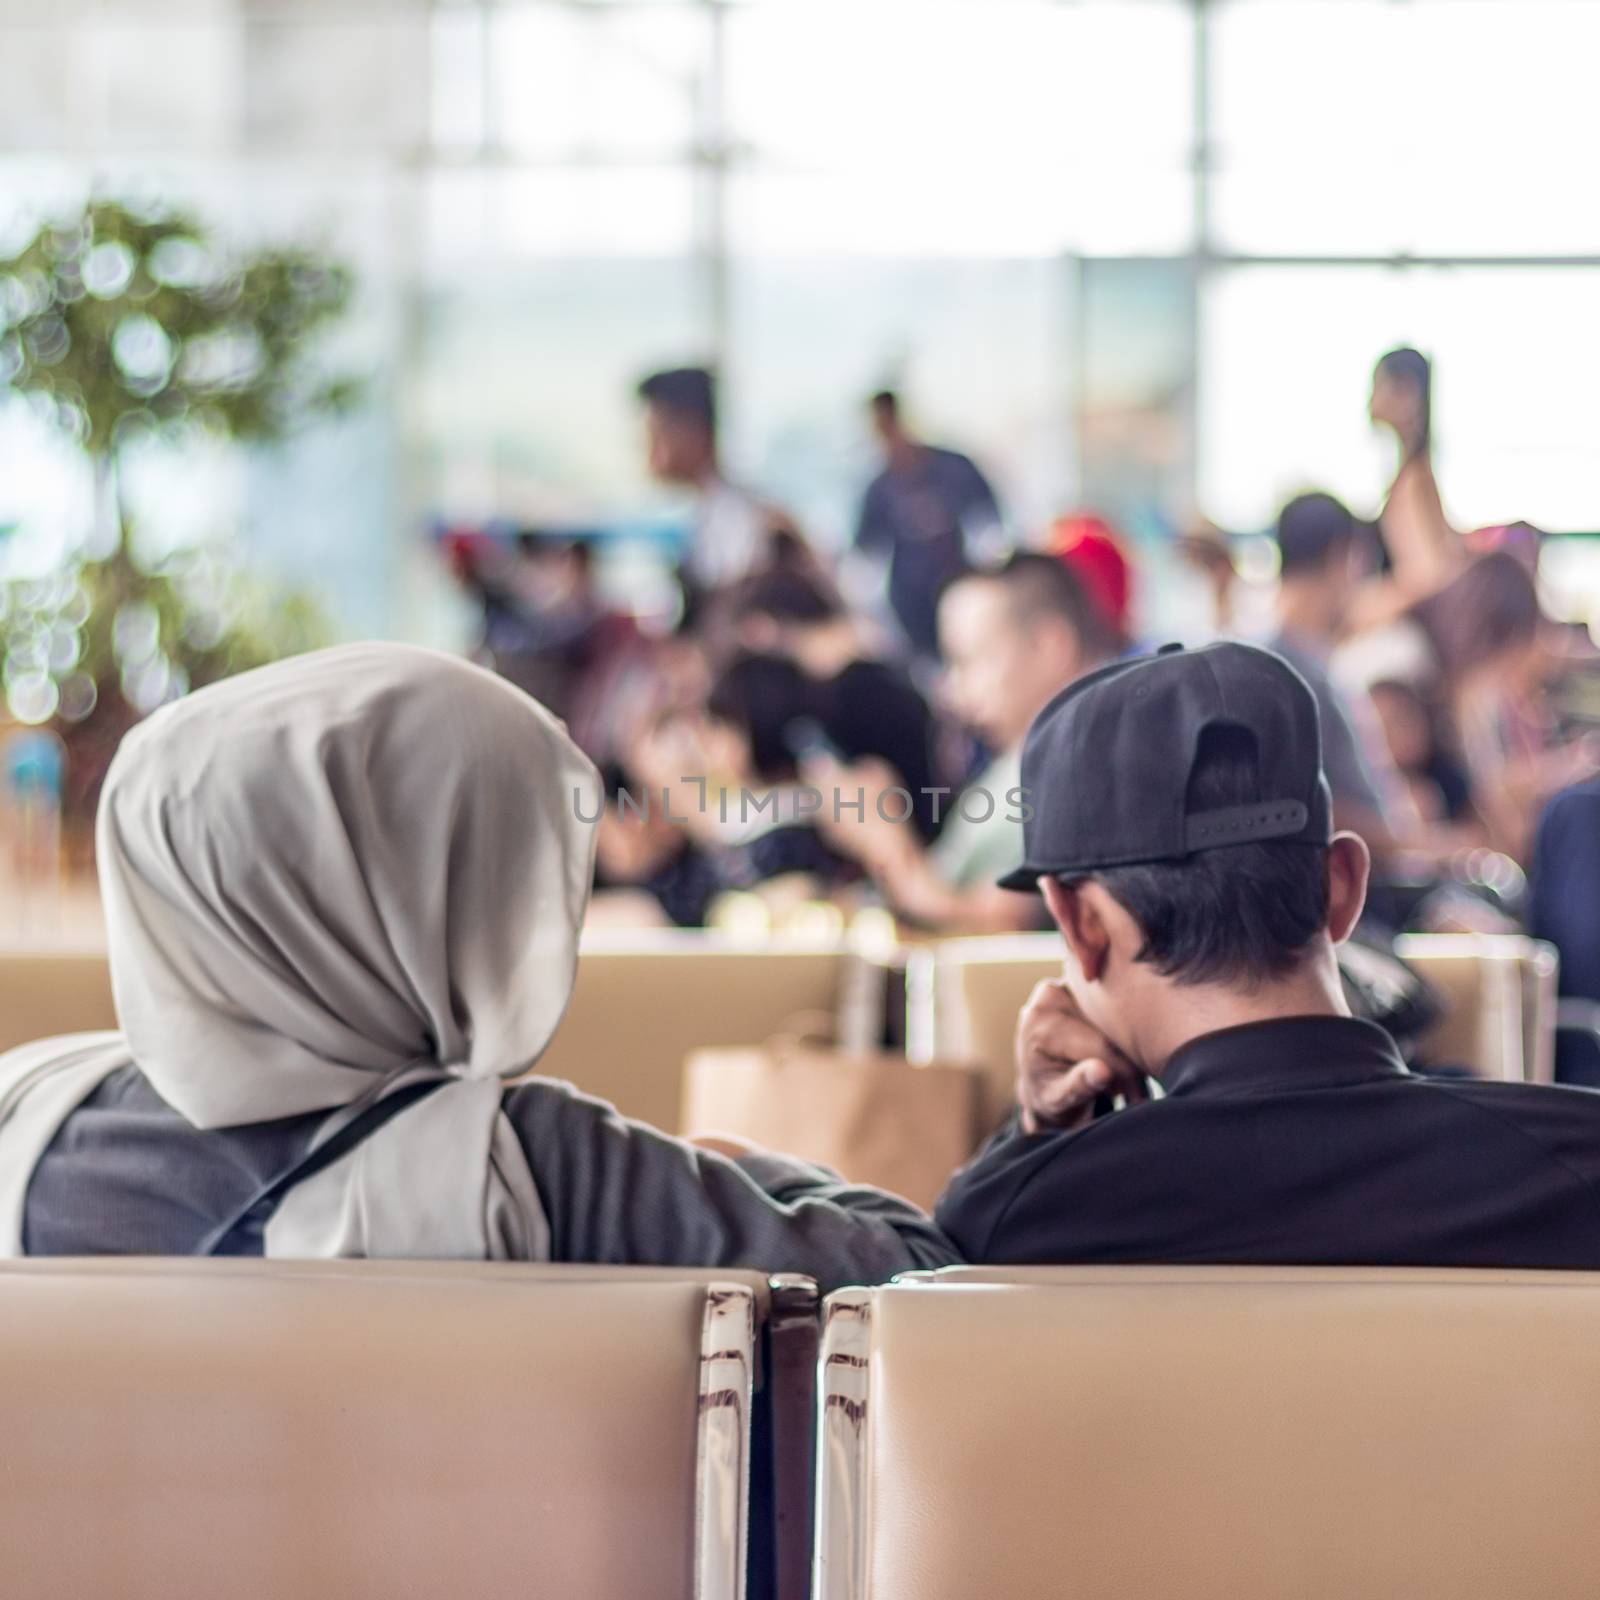 Modern muslim islamic asian couple sitting and waiting for flight departure at international airport terminal.